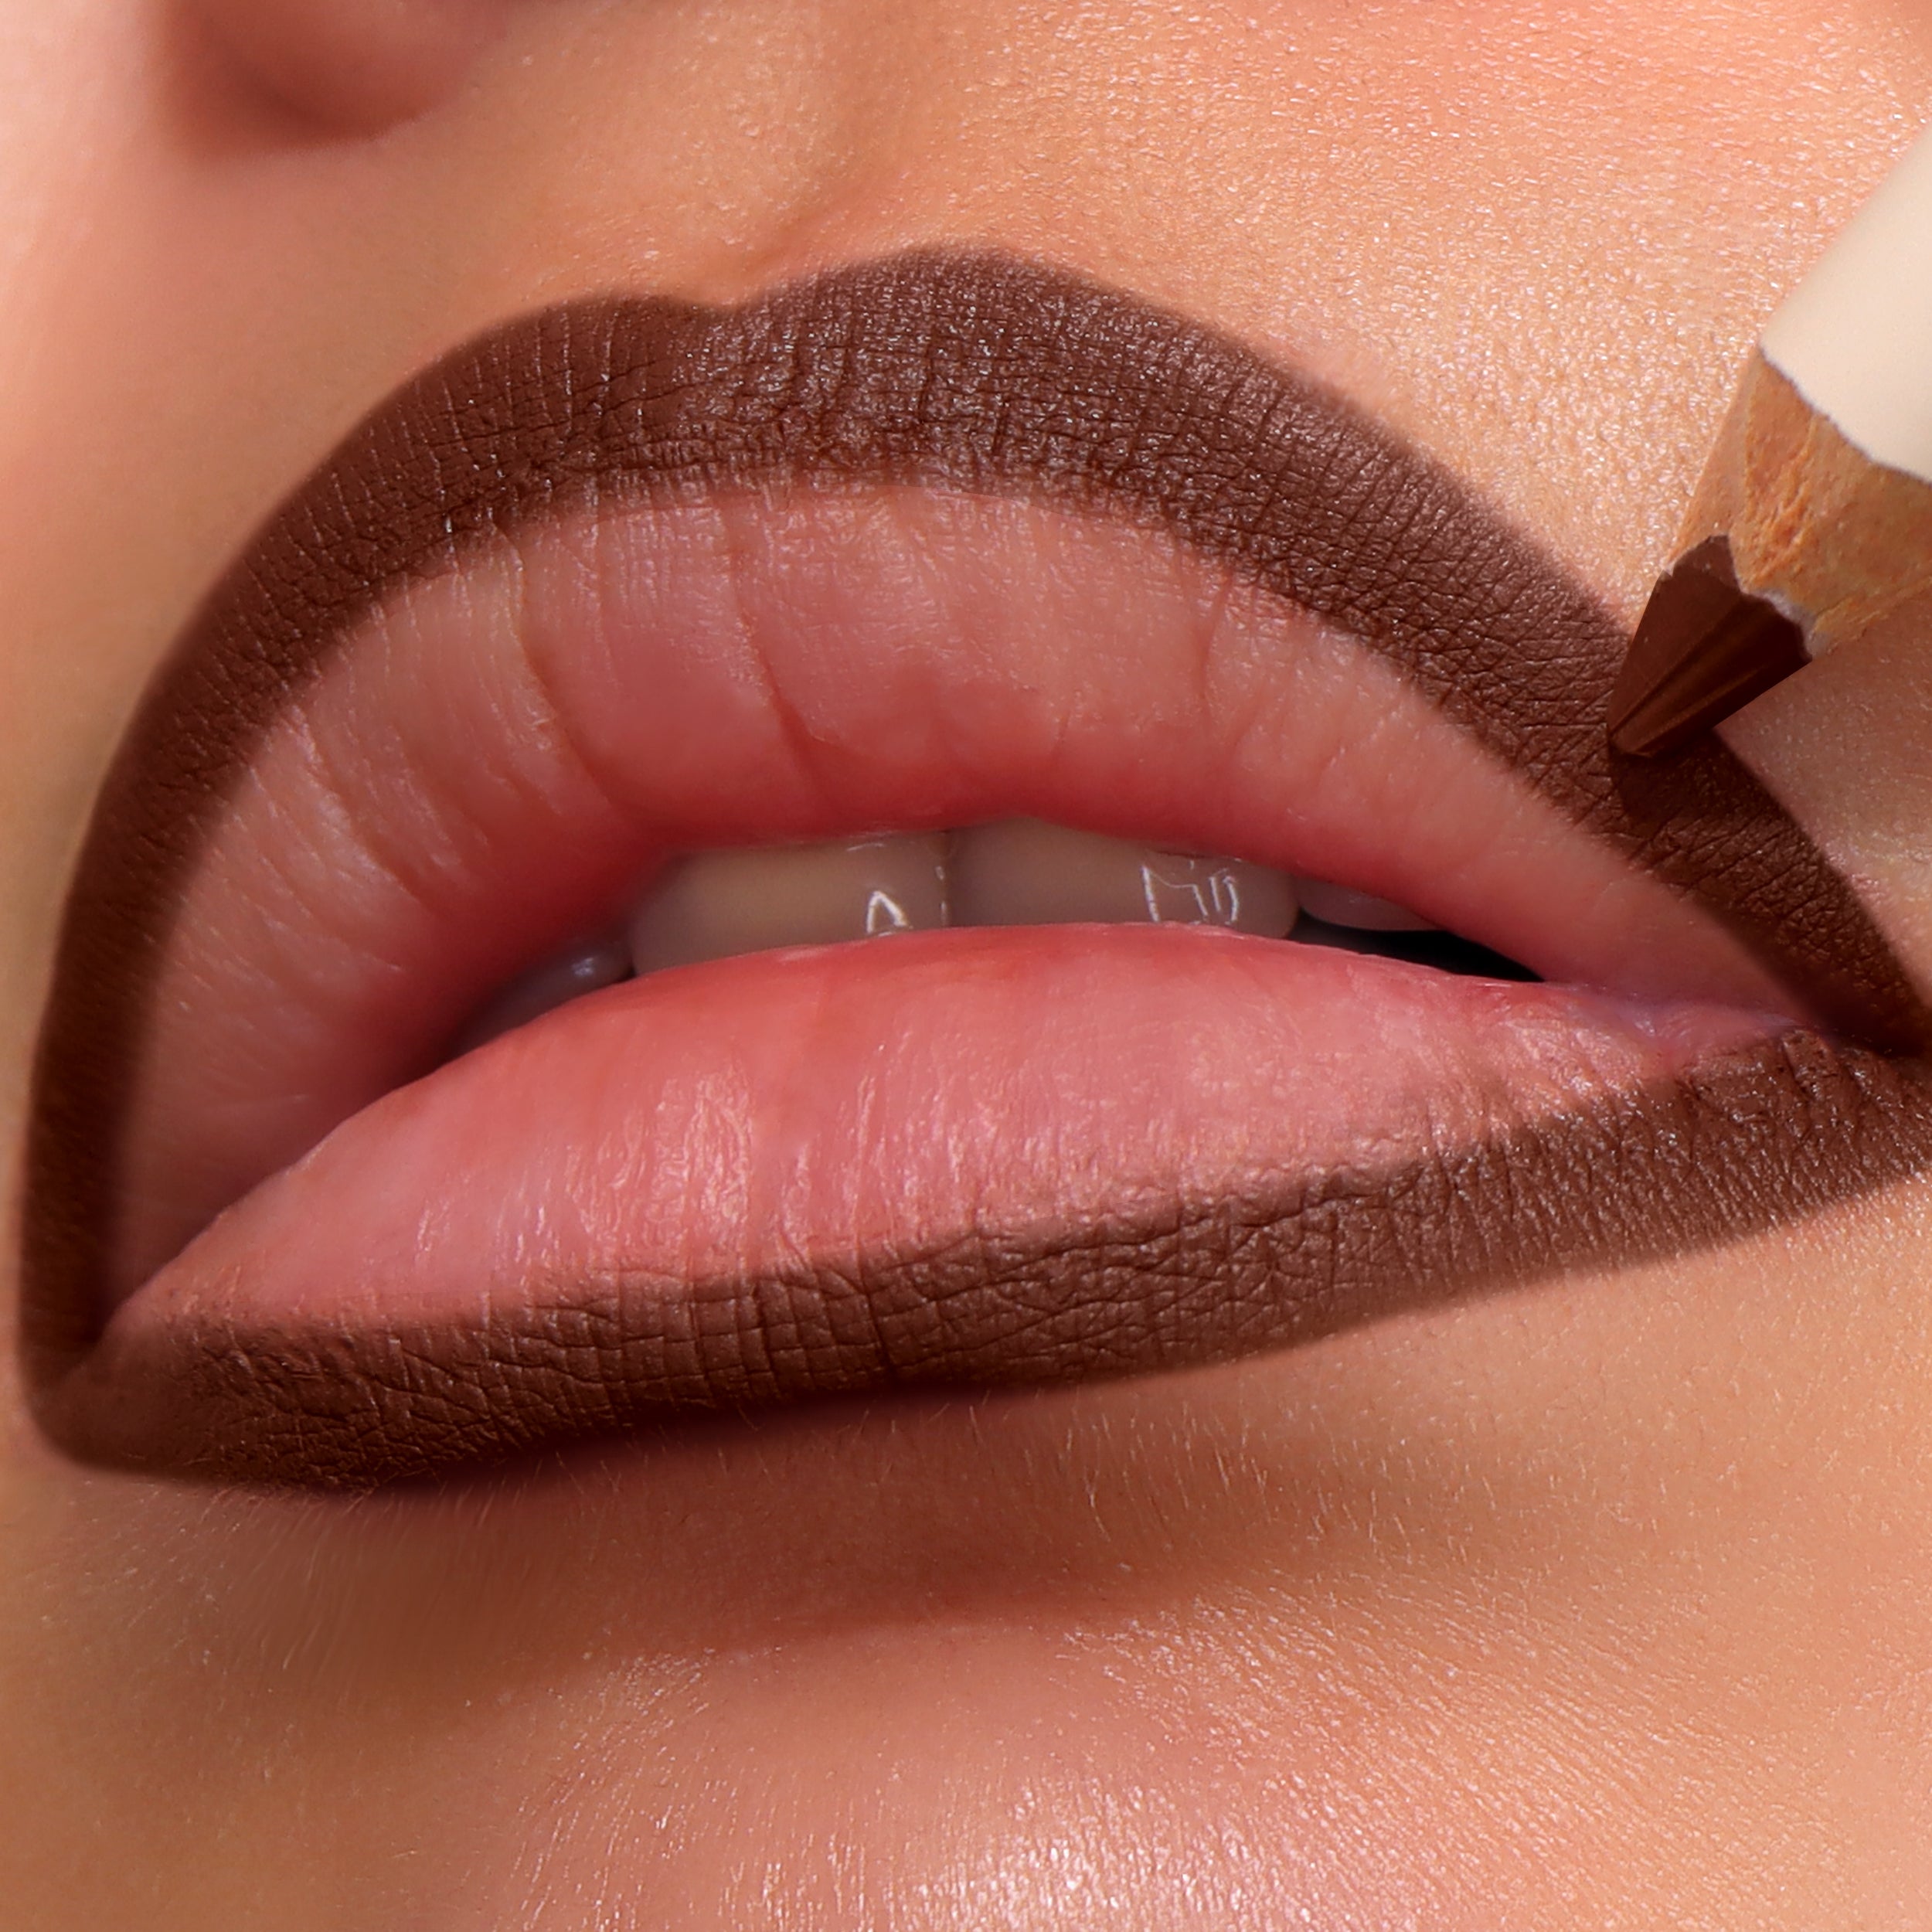 Must-Have Lip Liner (008, Chocolate)